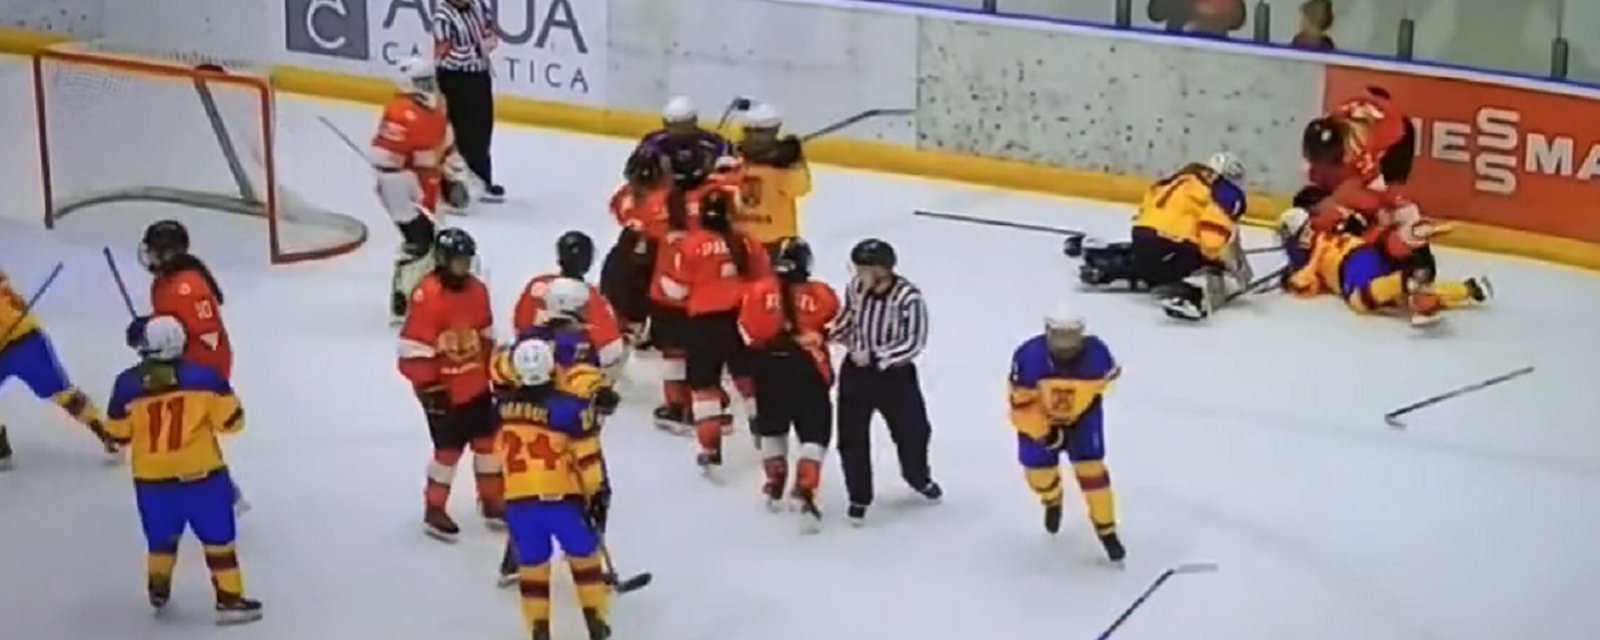 Bench clearing brawl at Women's Hockey World Championship leads to 554 penalty minutes!